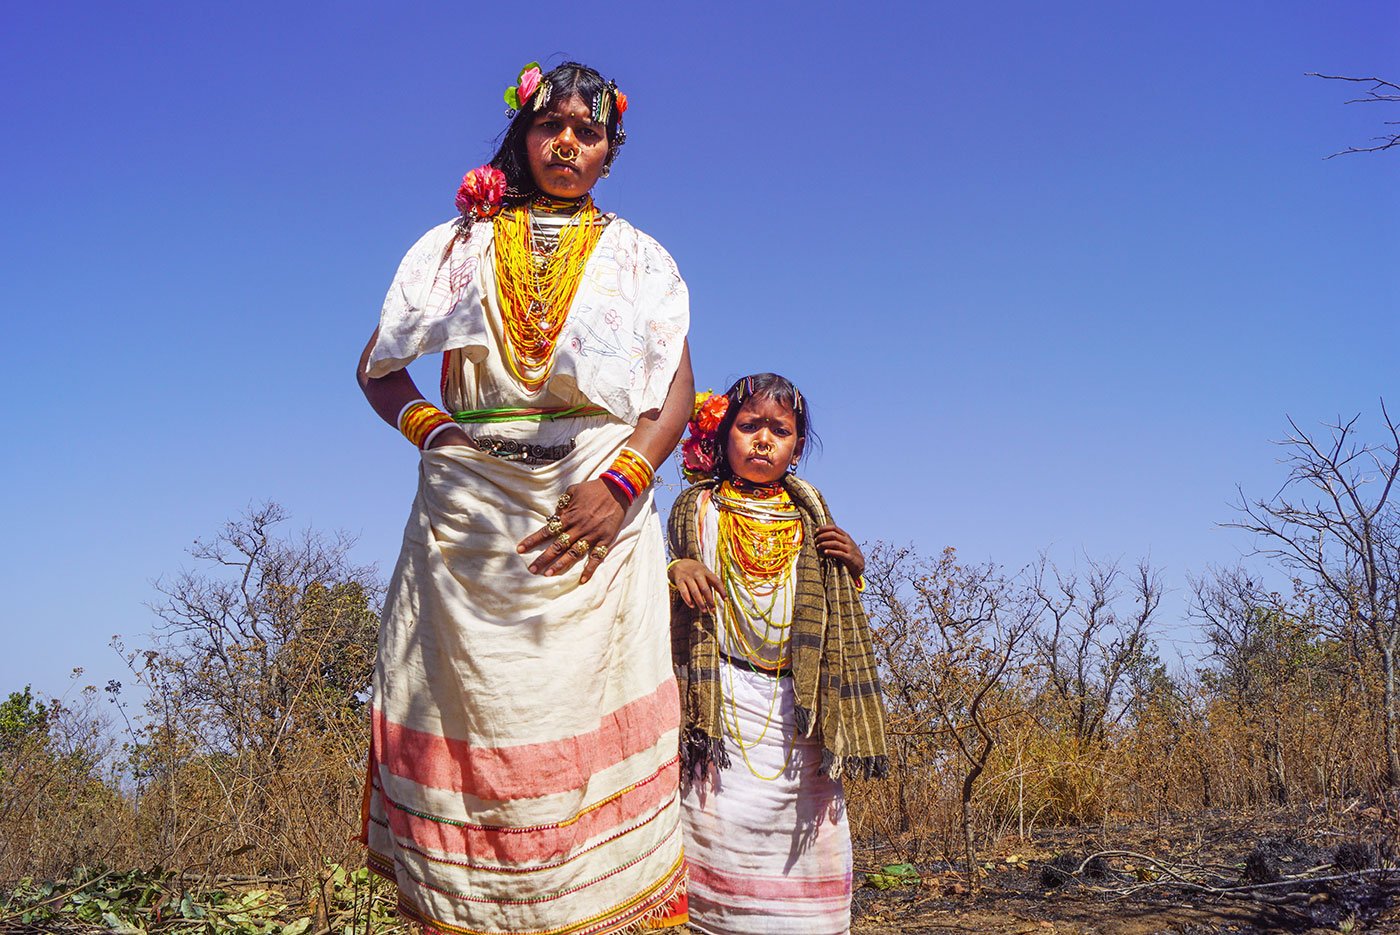 A tribal woman and a young tribal girl in their traditional attire